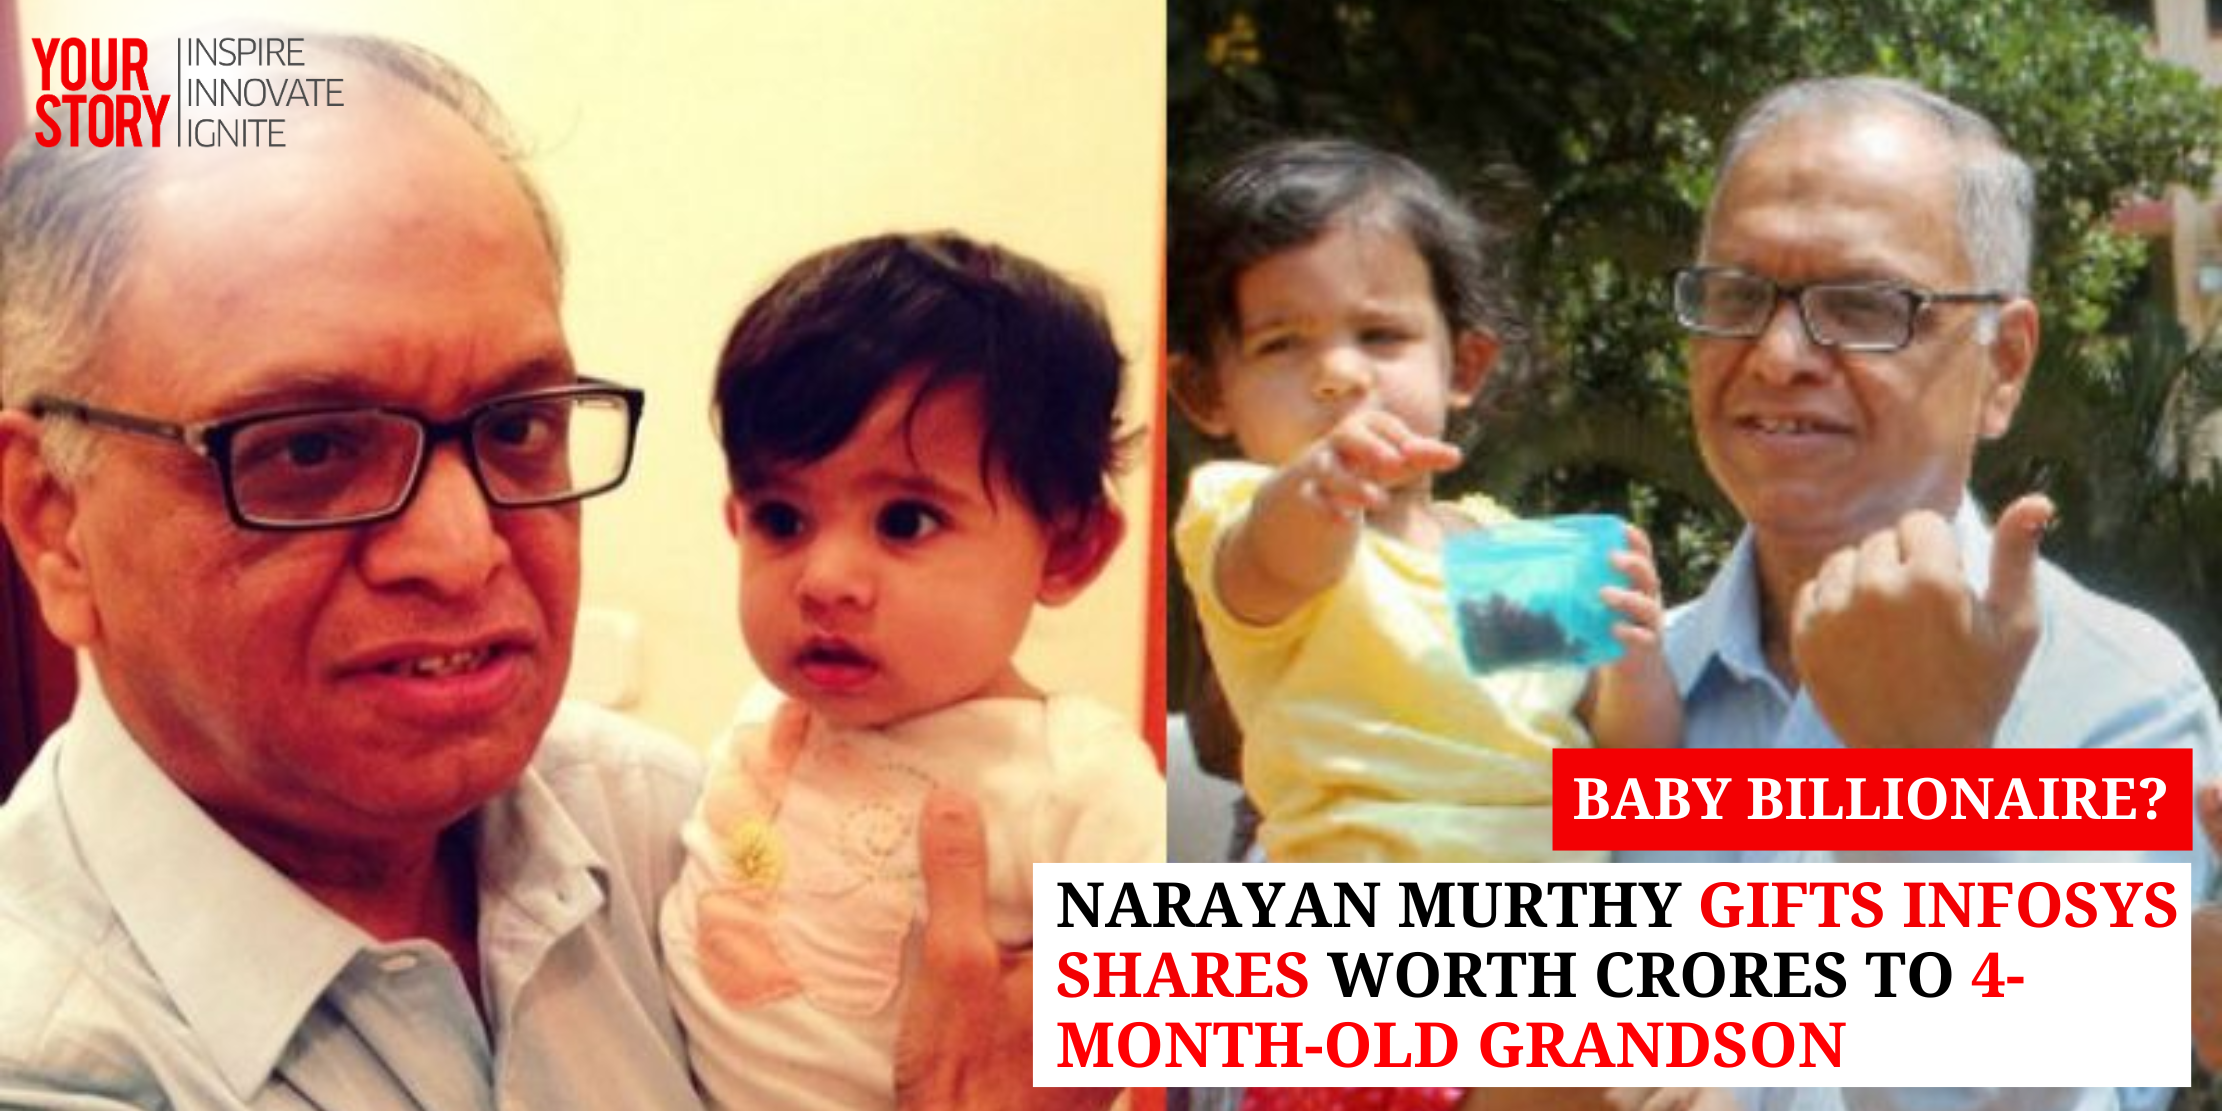 Baby Billionaire? Narayan Murthy Gifts Infosys Shares Worth Crores to 4-Month-Old Grandson